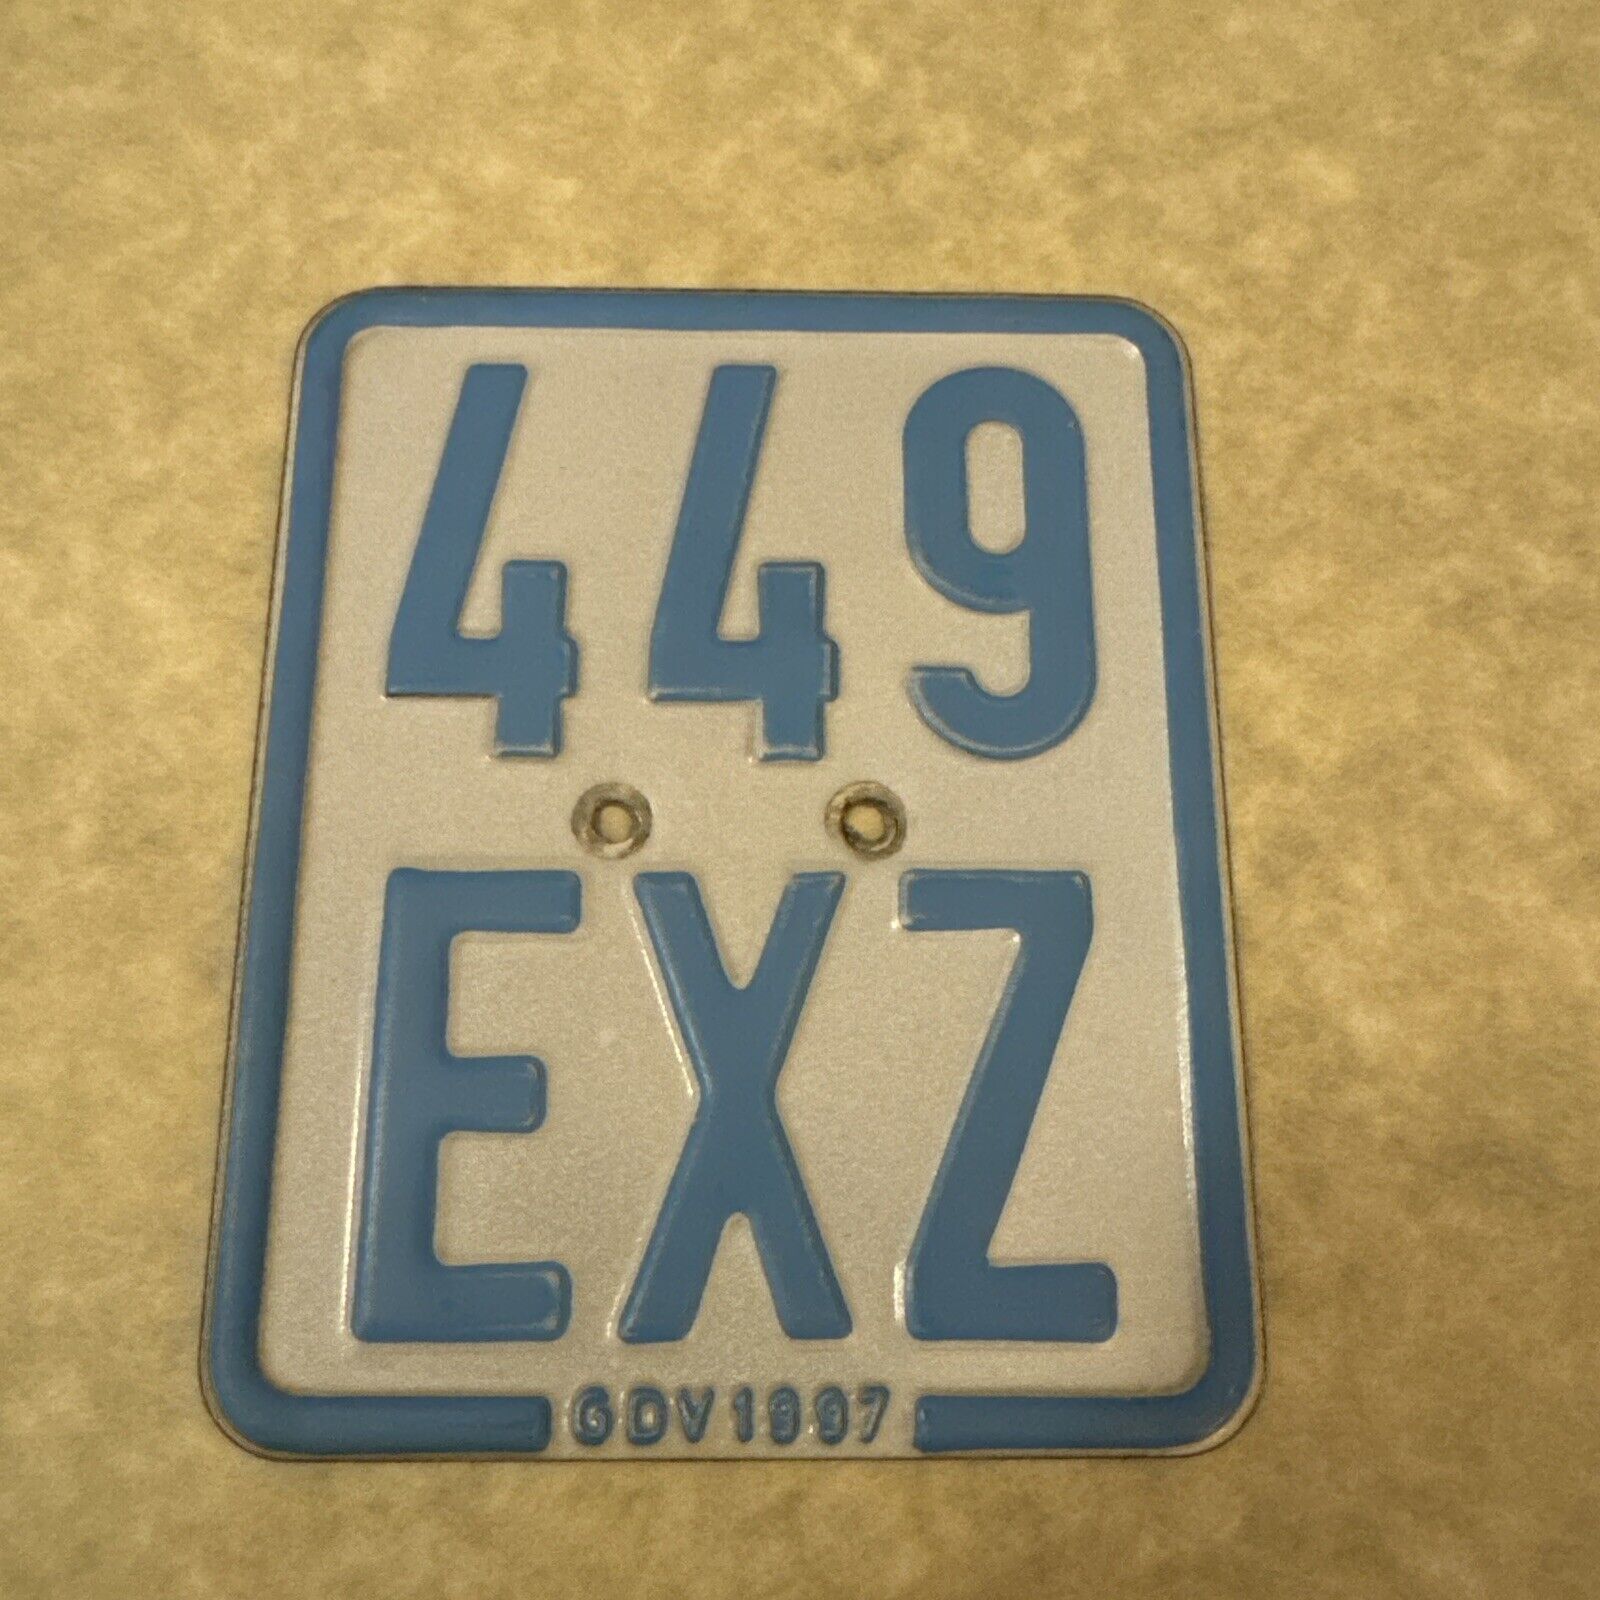 1997 Germany Moped License Plate.  🇩🇪 Vintage German Scooter 🛵 Tag # 449 EXZ